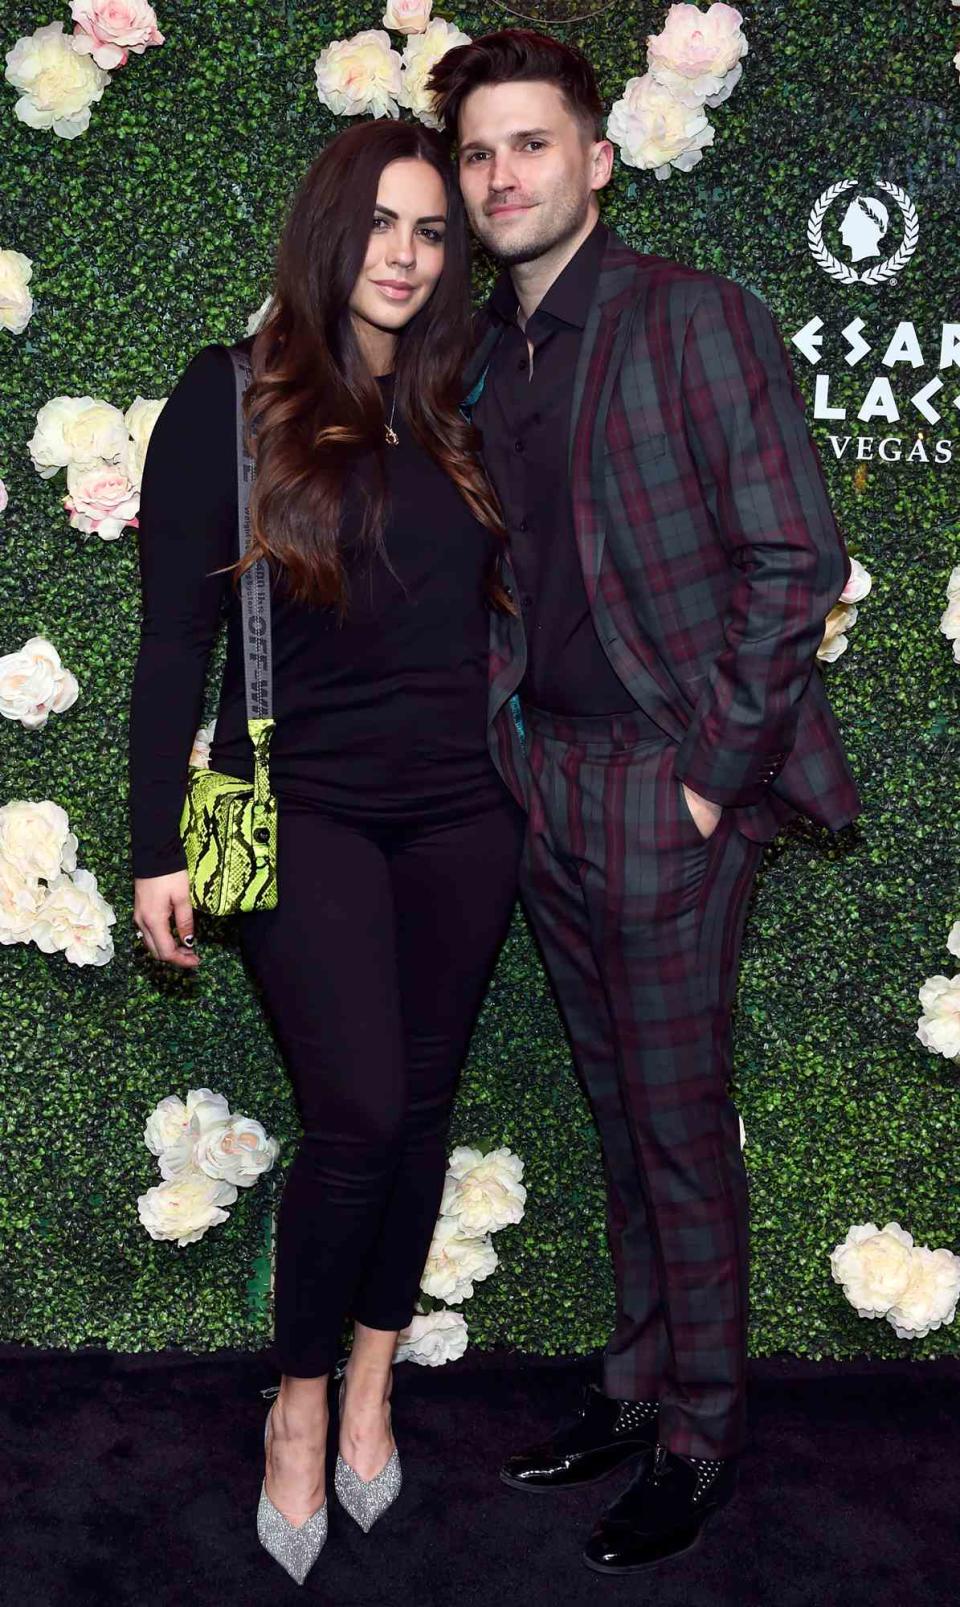 Katie Maloney (L) and Tom Schwartz attend the grand opening of Vanderpump Cocktail Garden at Caesars Palace on March 30, 2019 in Las Vegas, Nevada